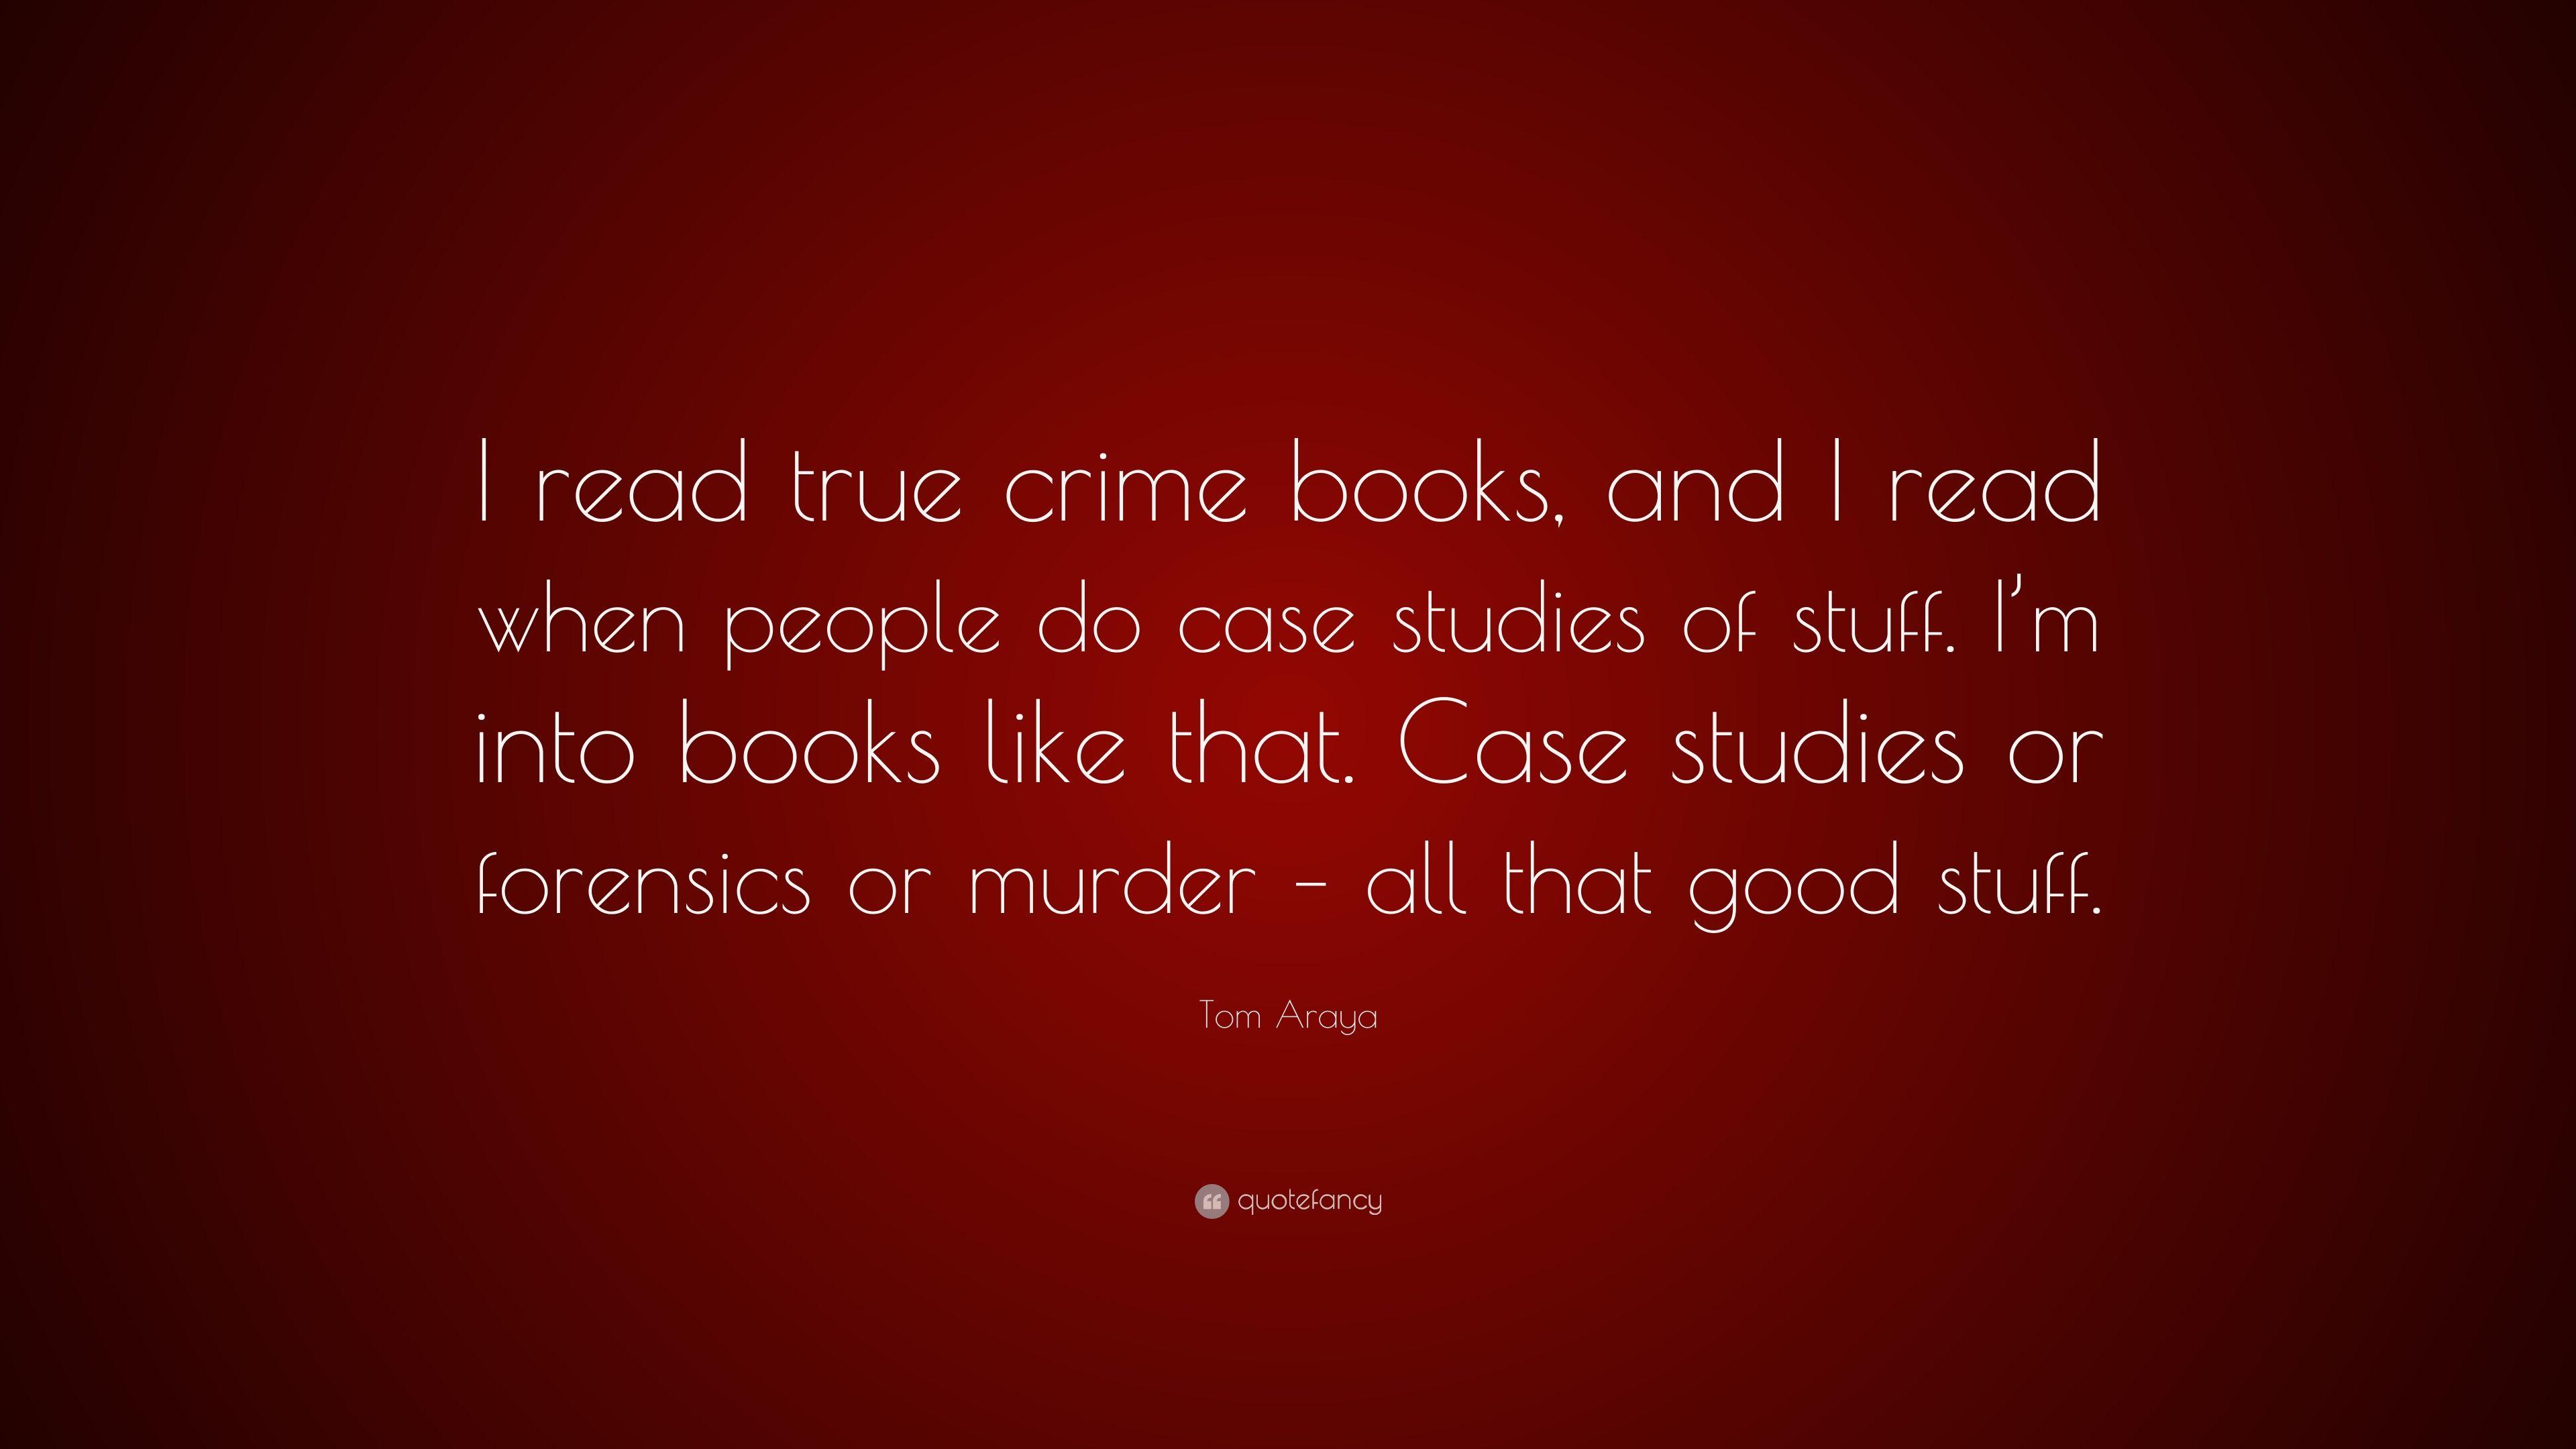 Tom Araya Quote: “I read true crime books, and I read when people do